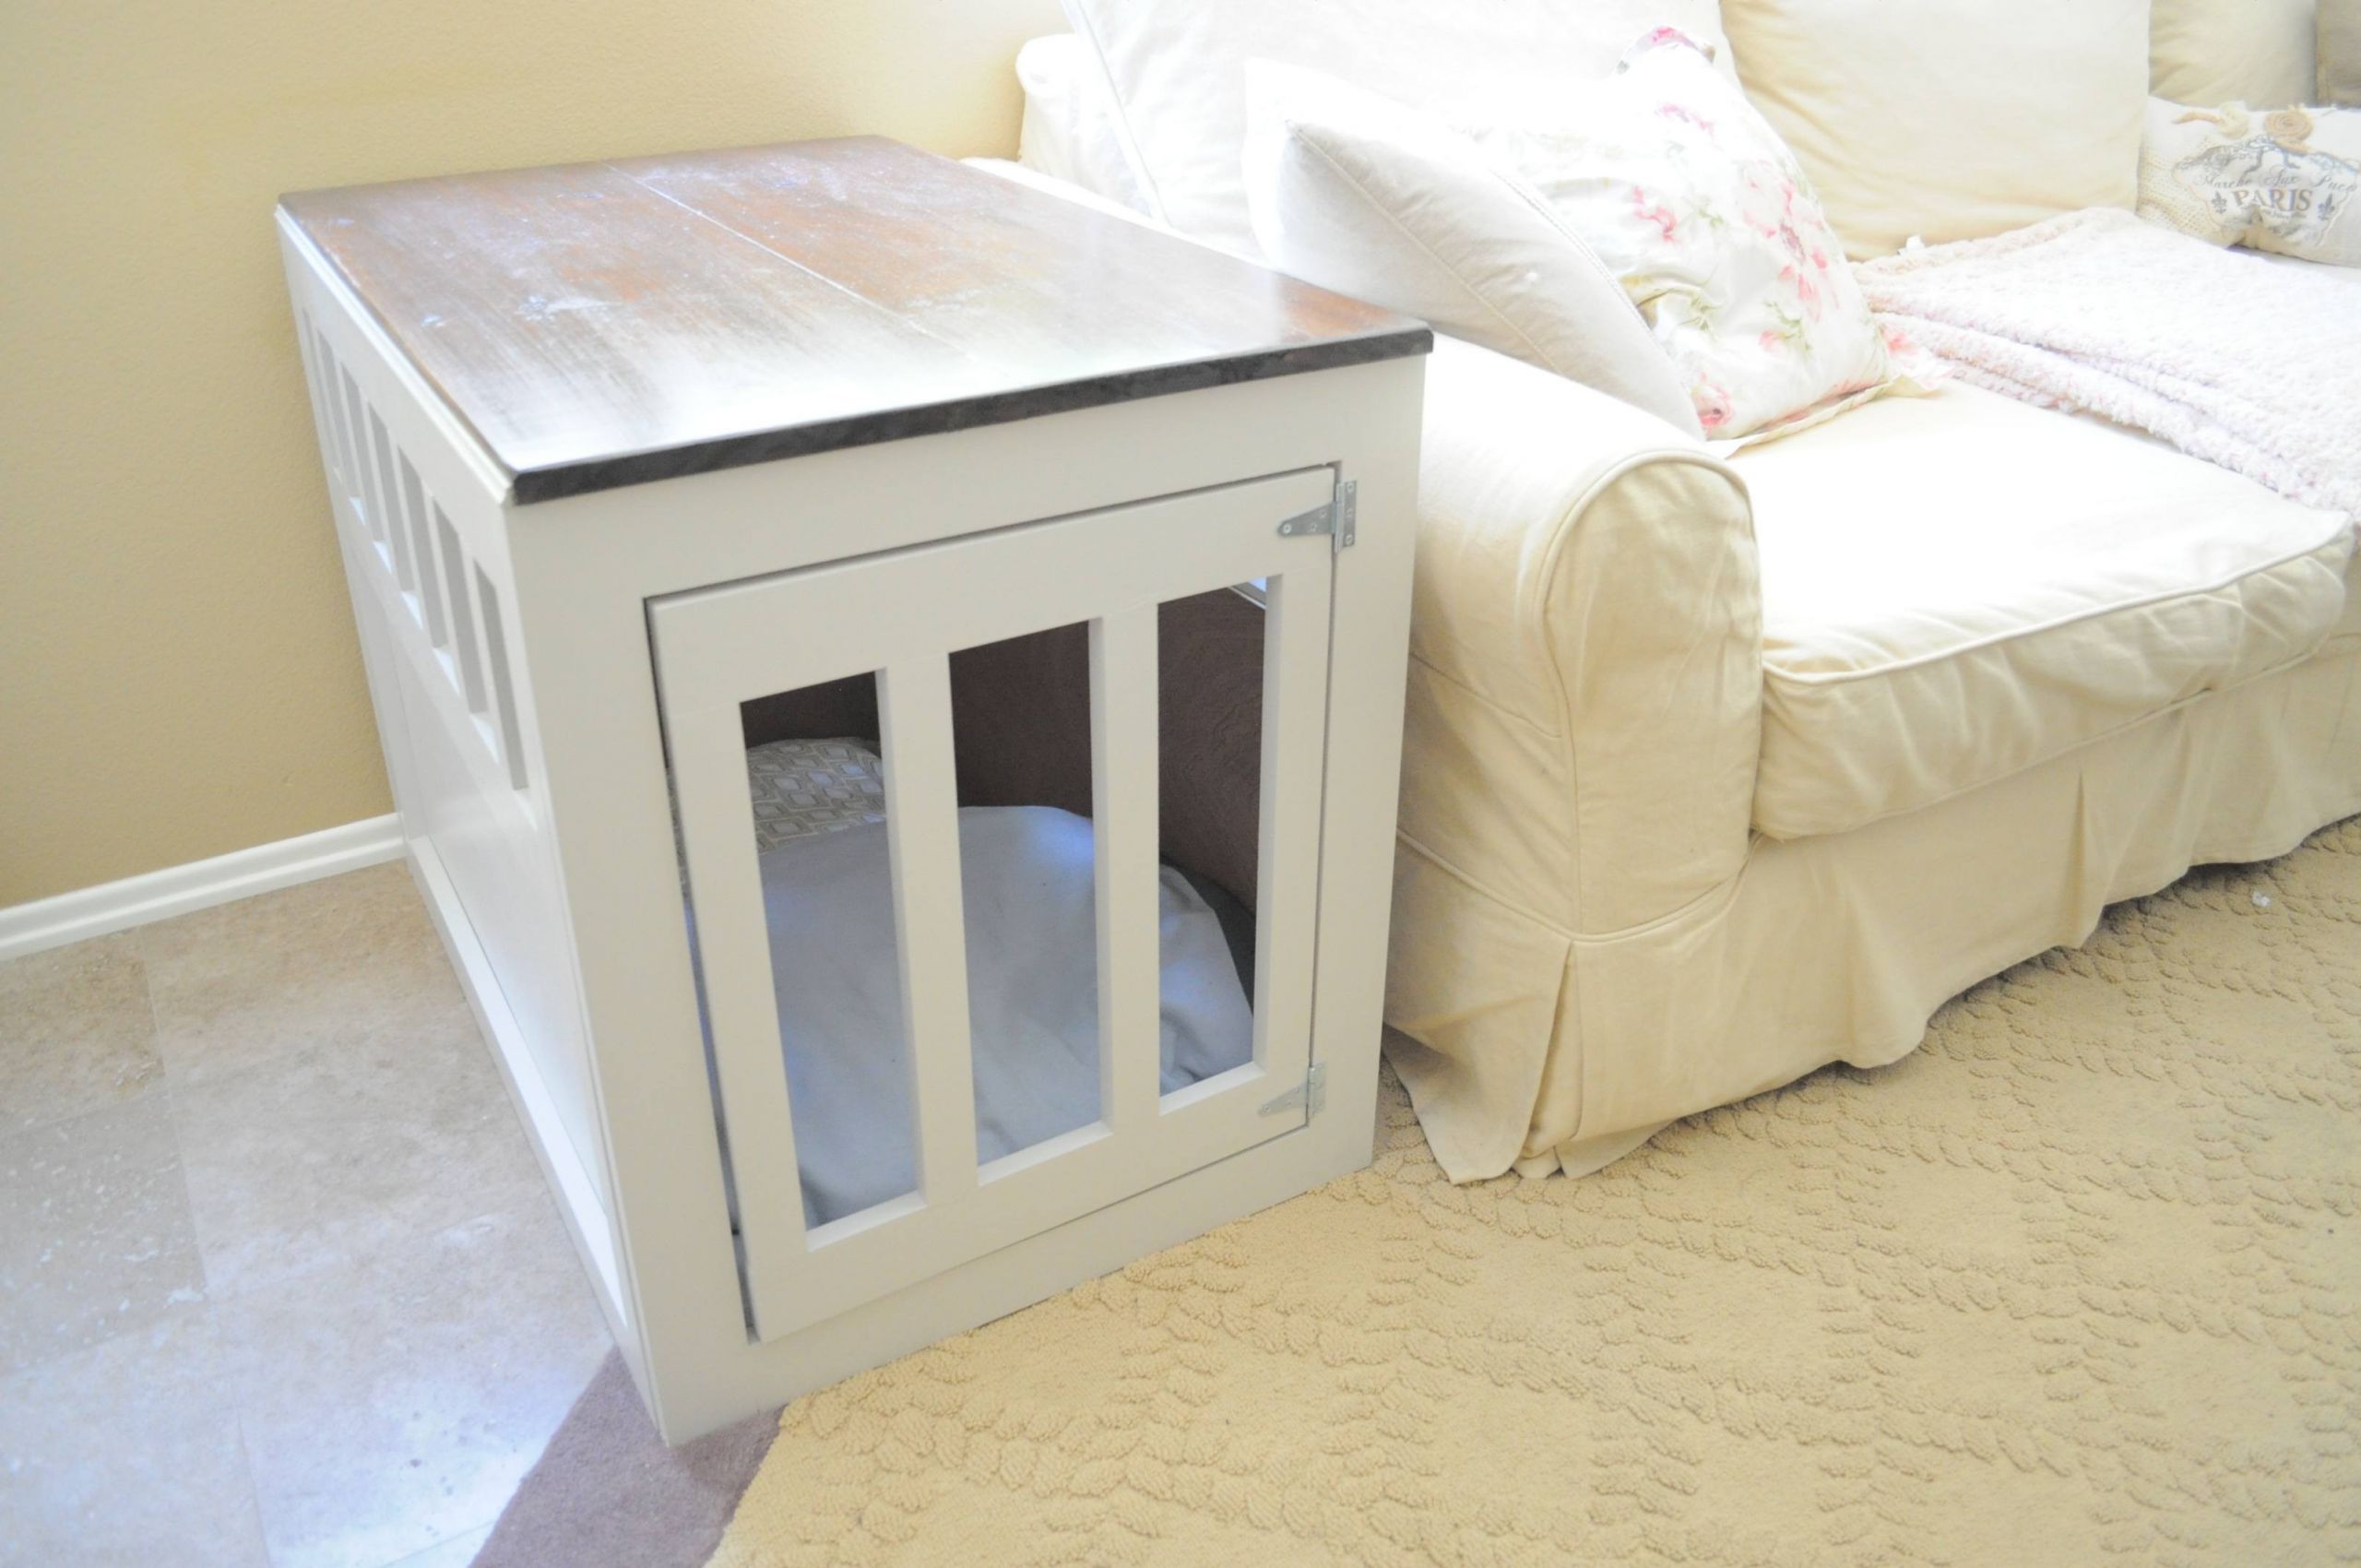 DIY Large Dog Crate
 Every Dog Owner Should Learn These 20 DIY Pet Projects